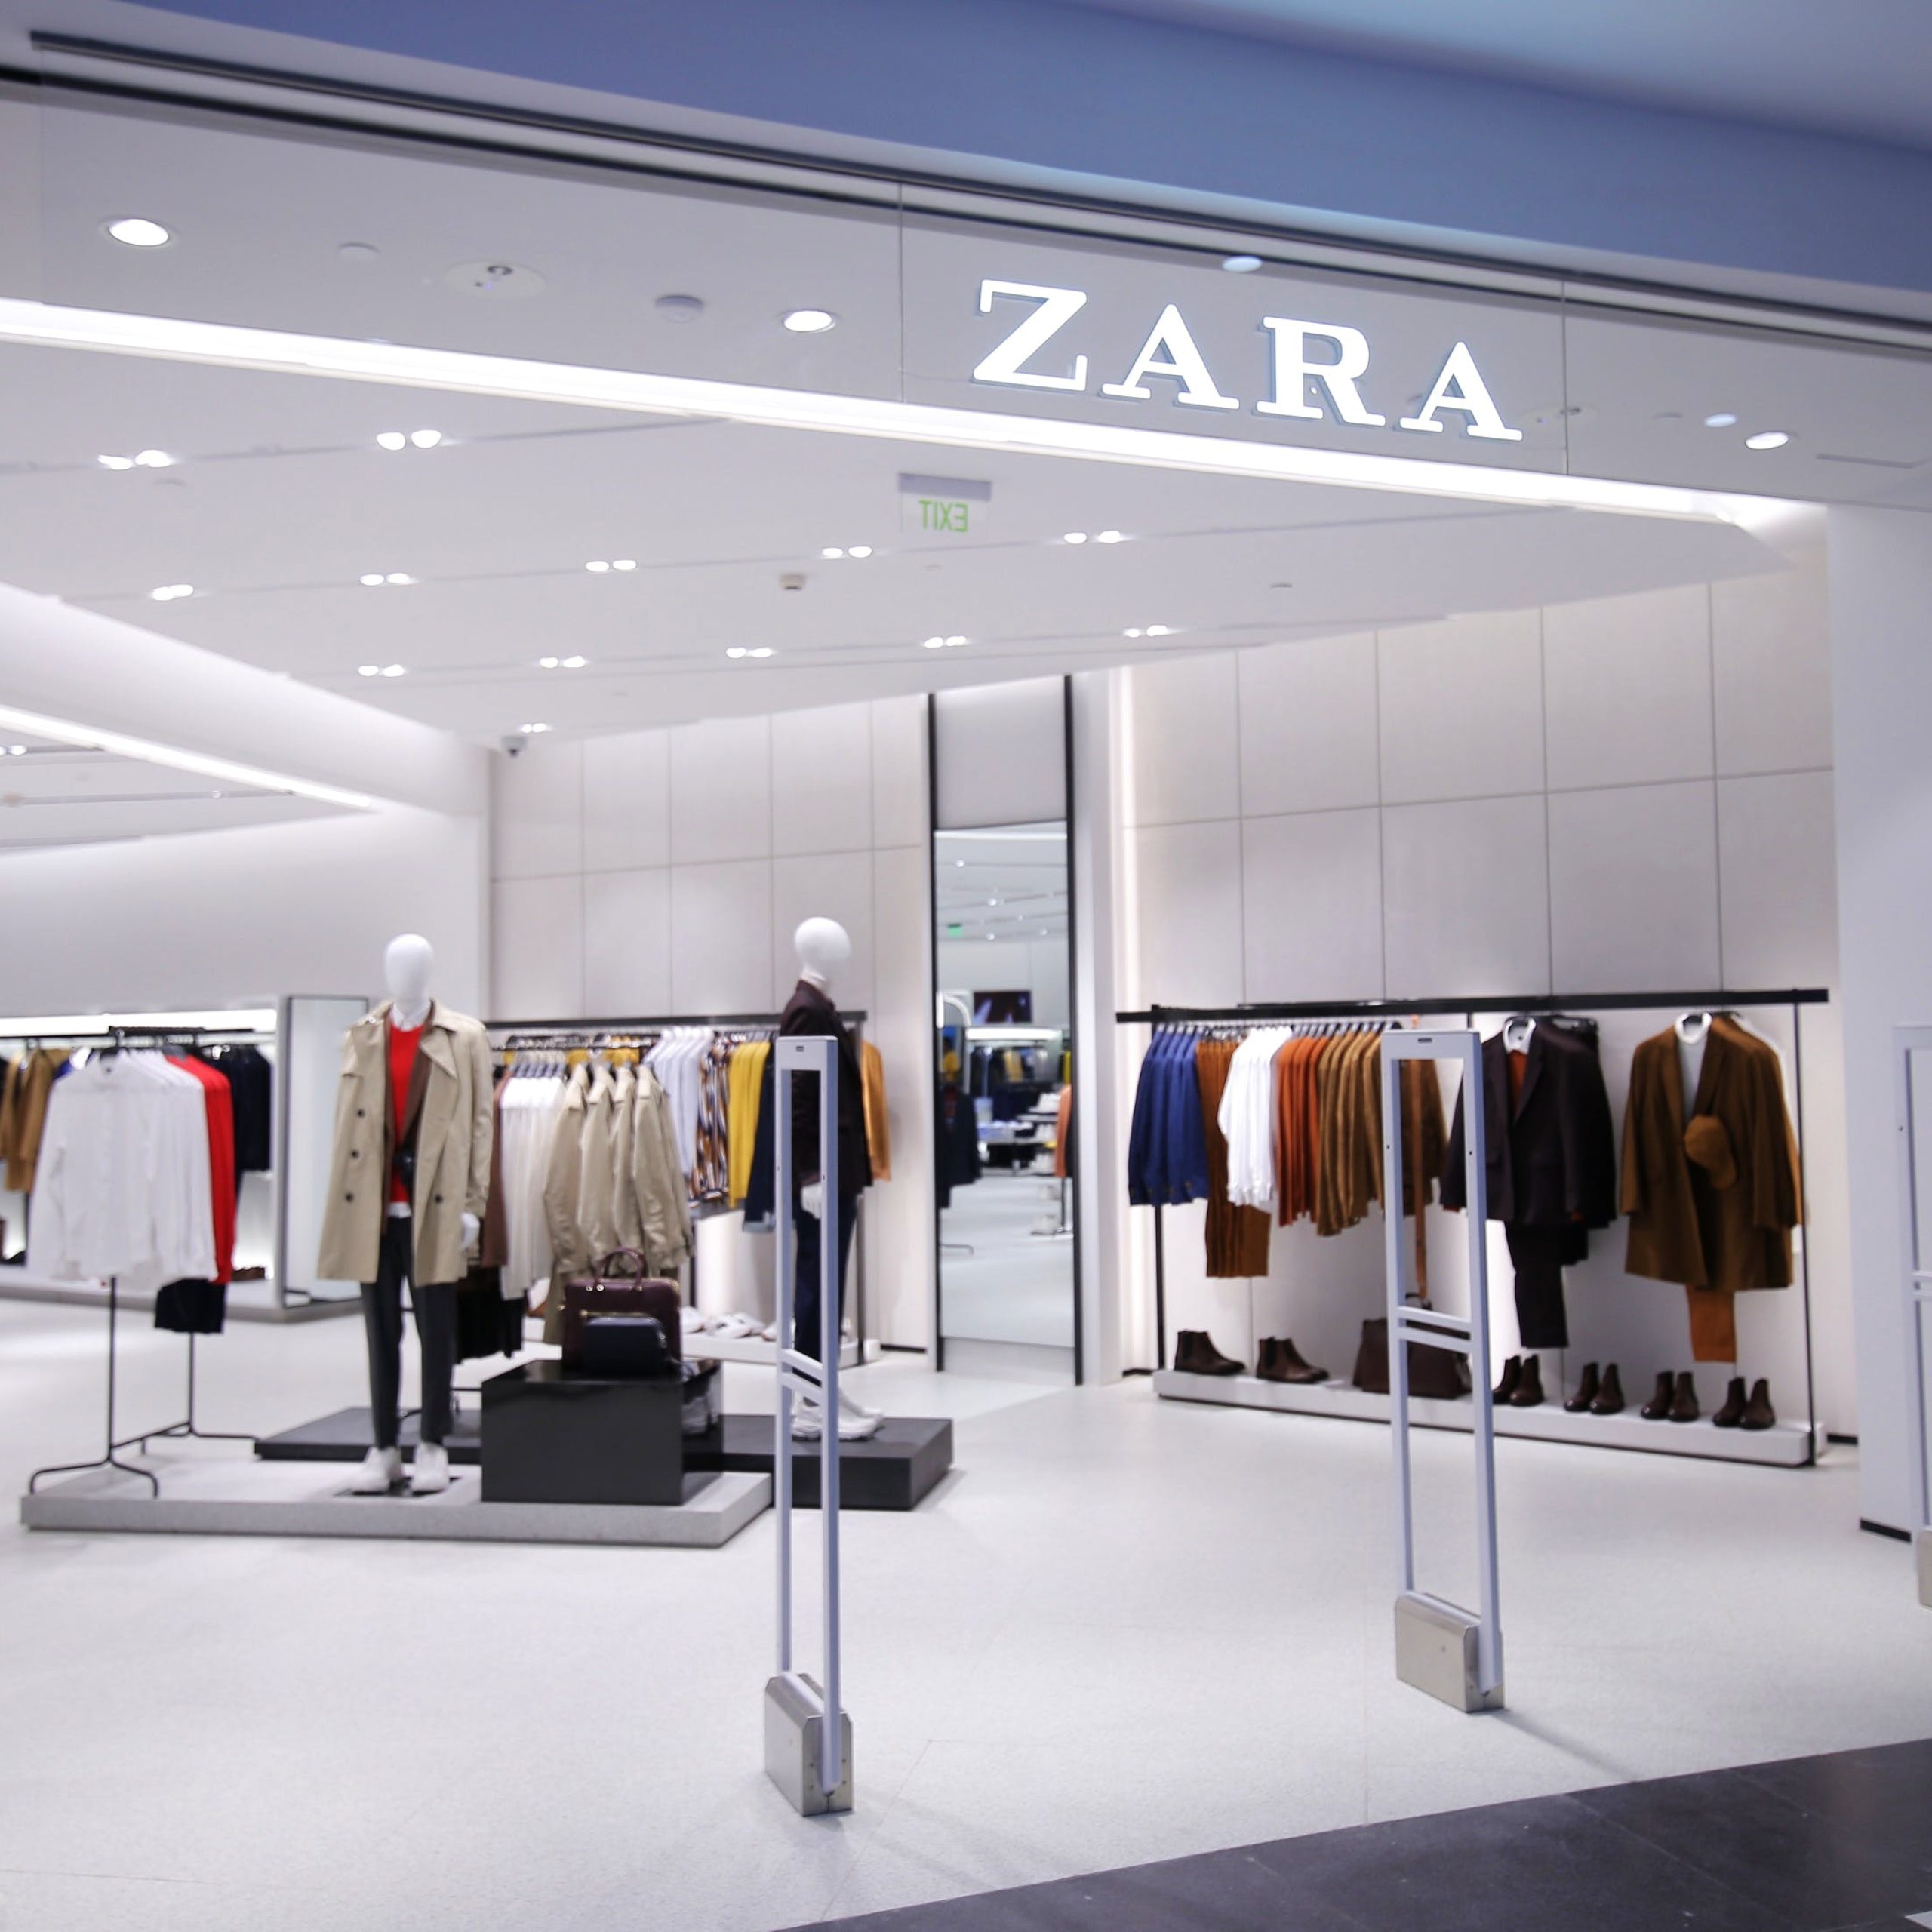 Inditex, The Parent Company Of Zara, Announces Commitment To Hiring More People With Disabilities